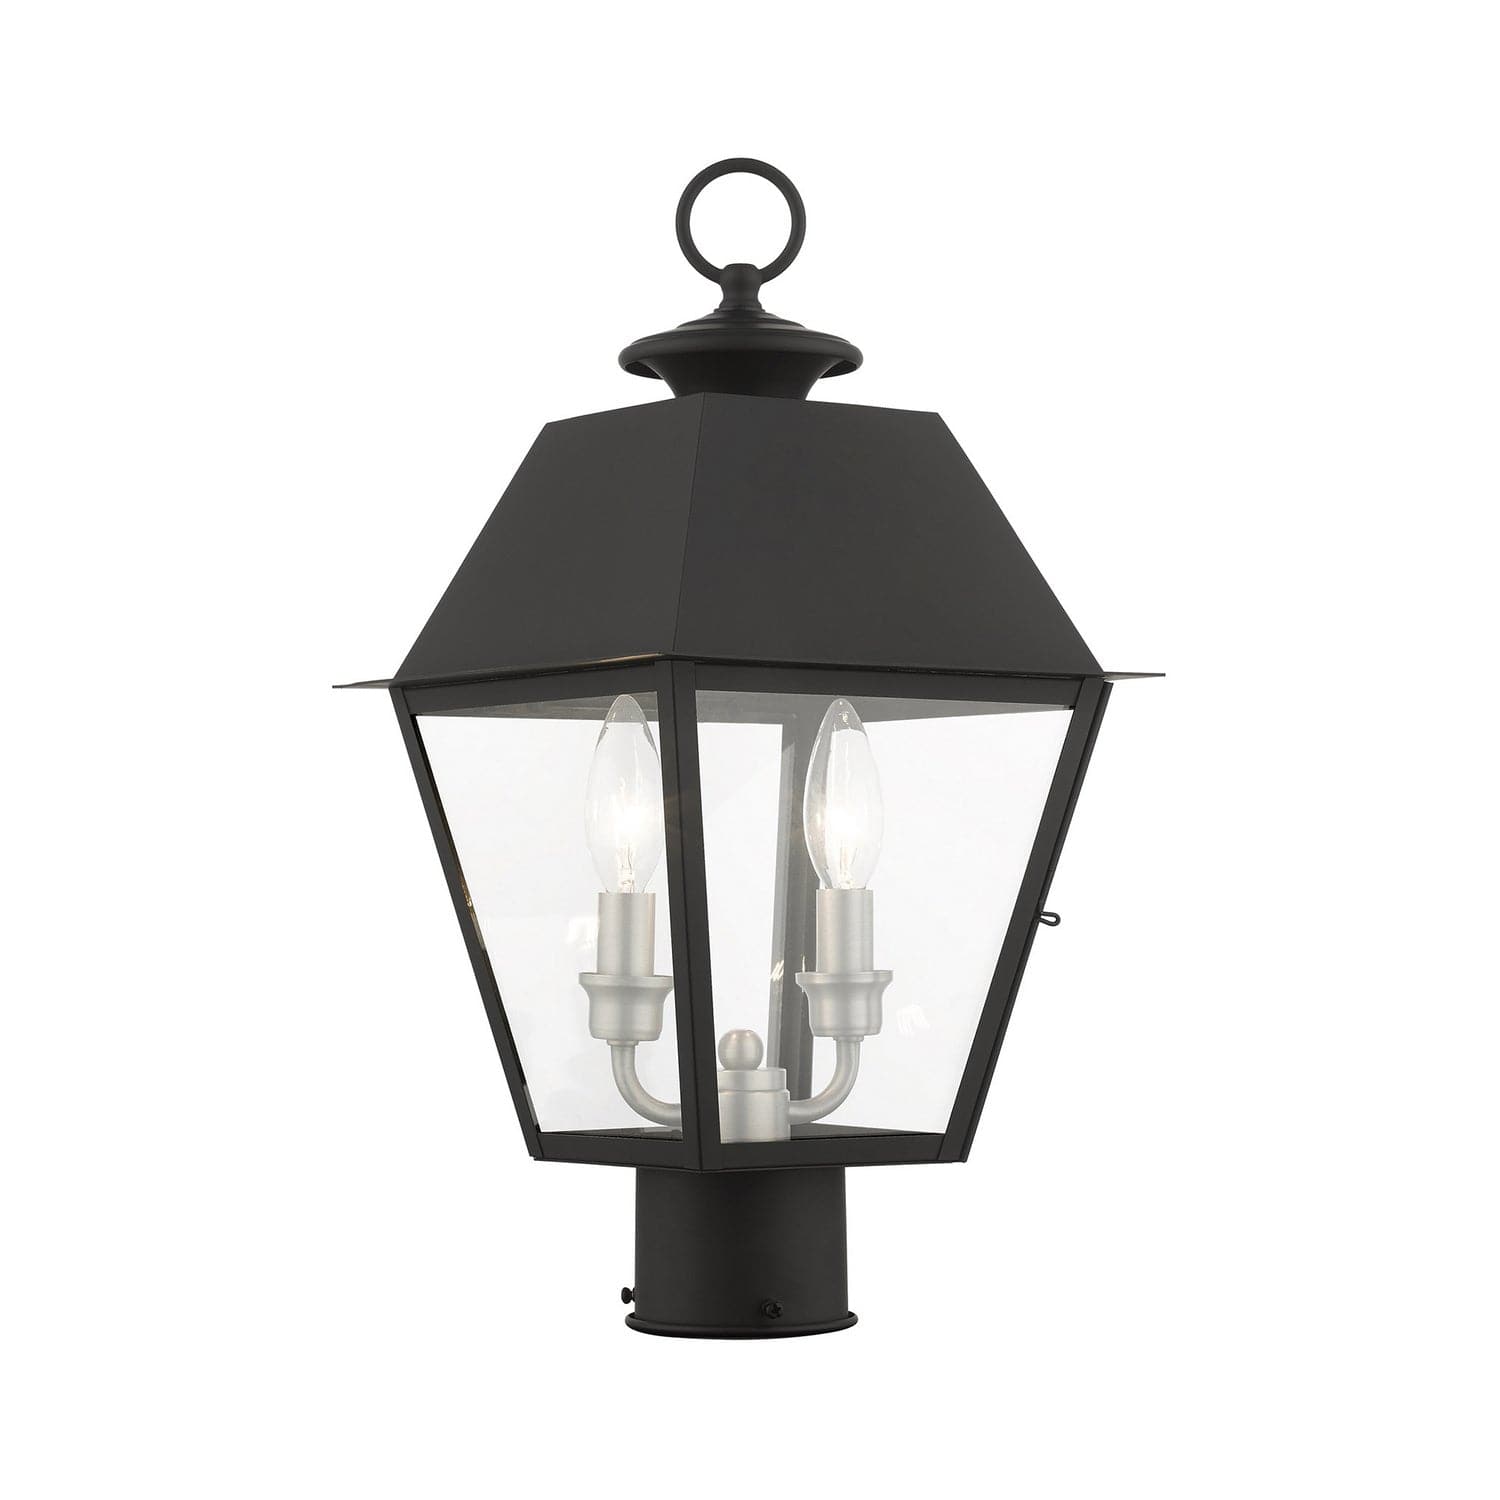 Livex Lighting - 27216-04 - Two Light Outdoor Post Top Lantern - Wentworth - Black w/ Brushed Nickel Cluster